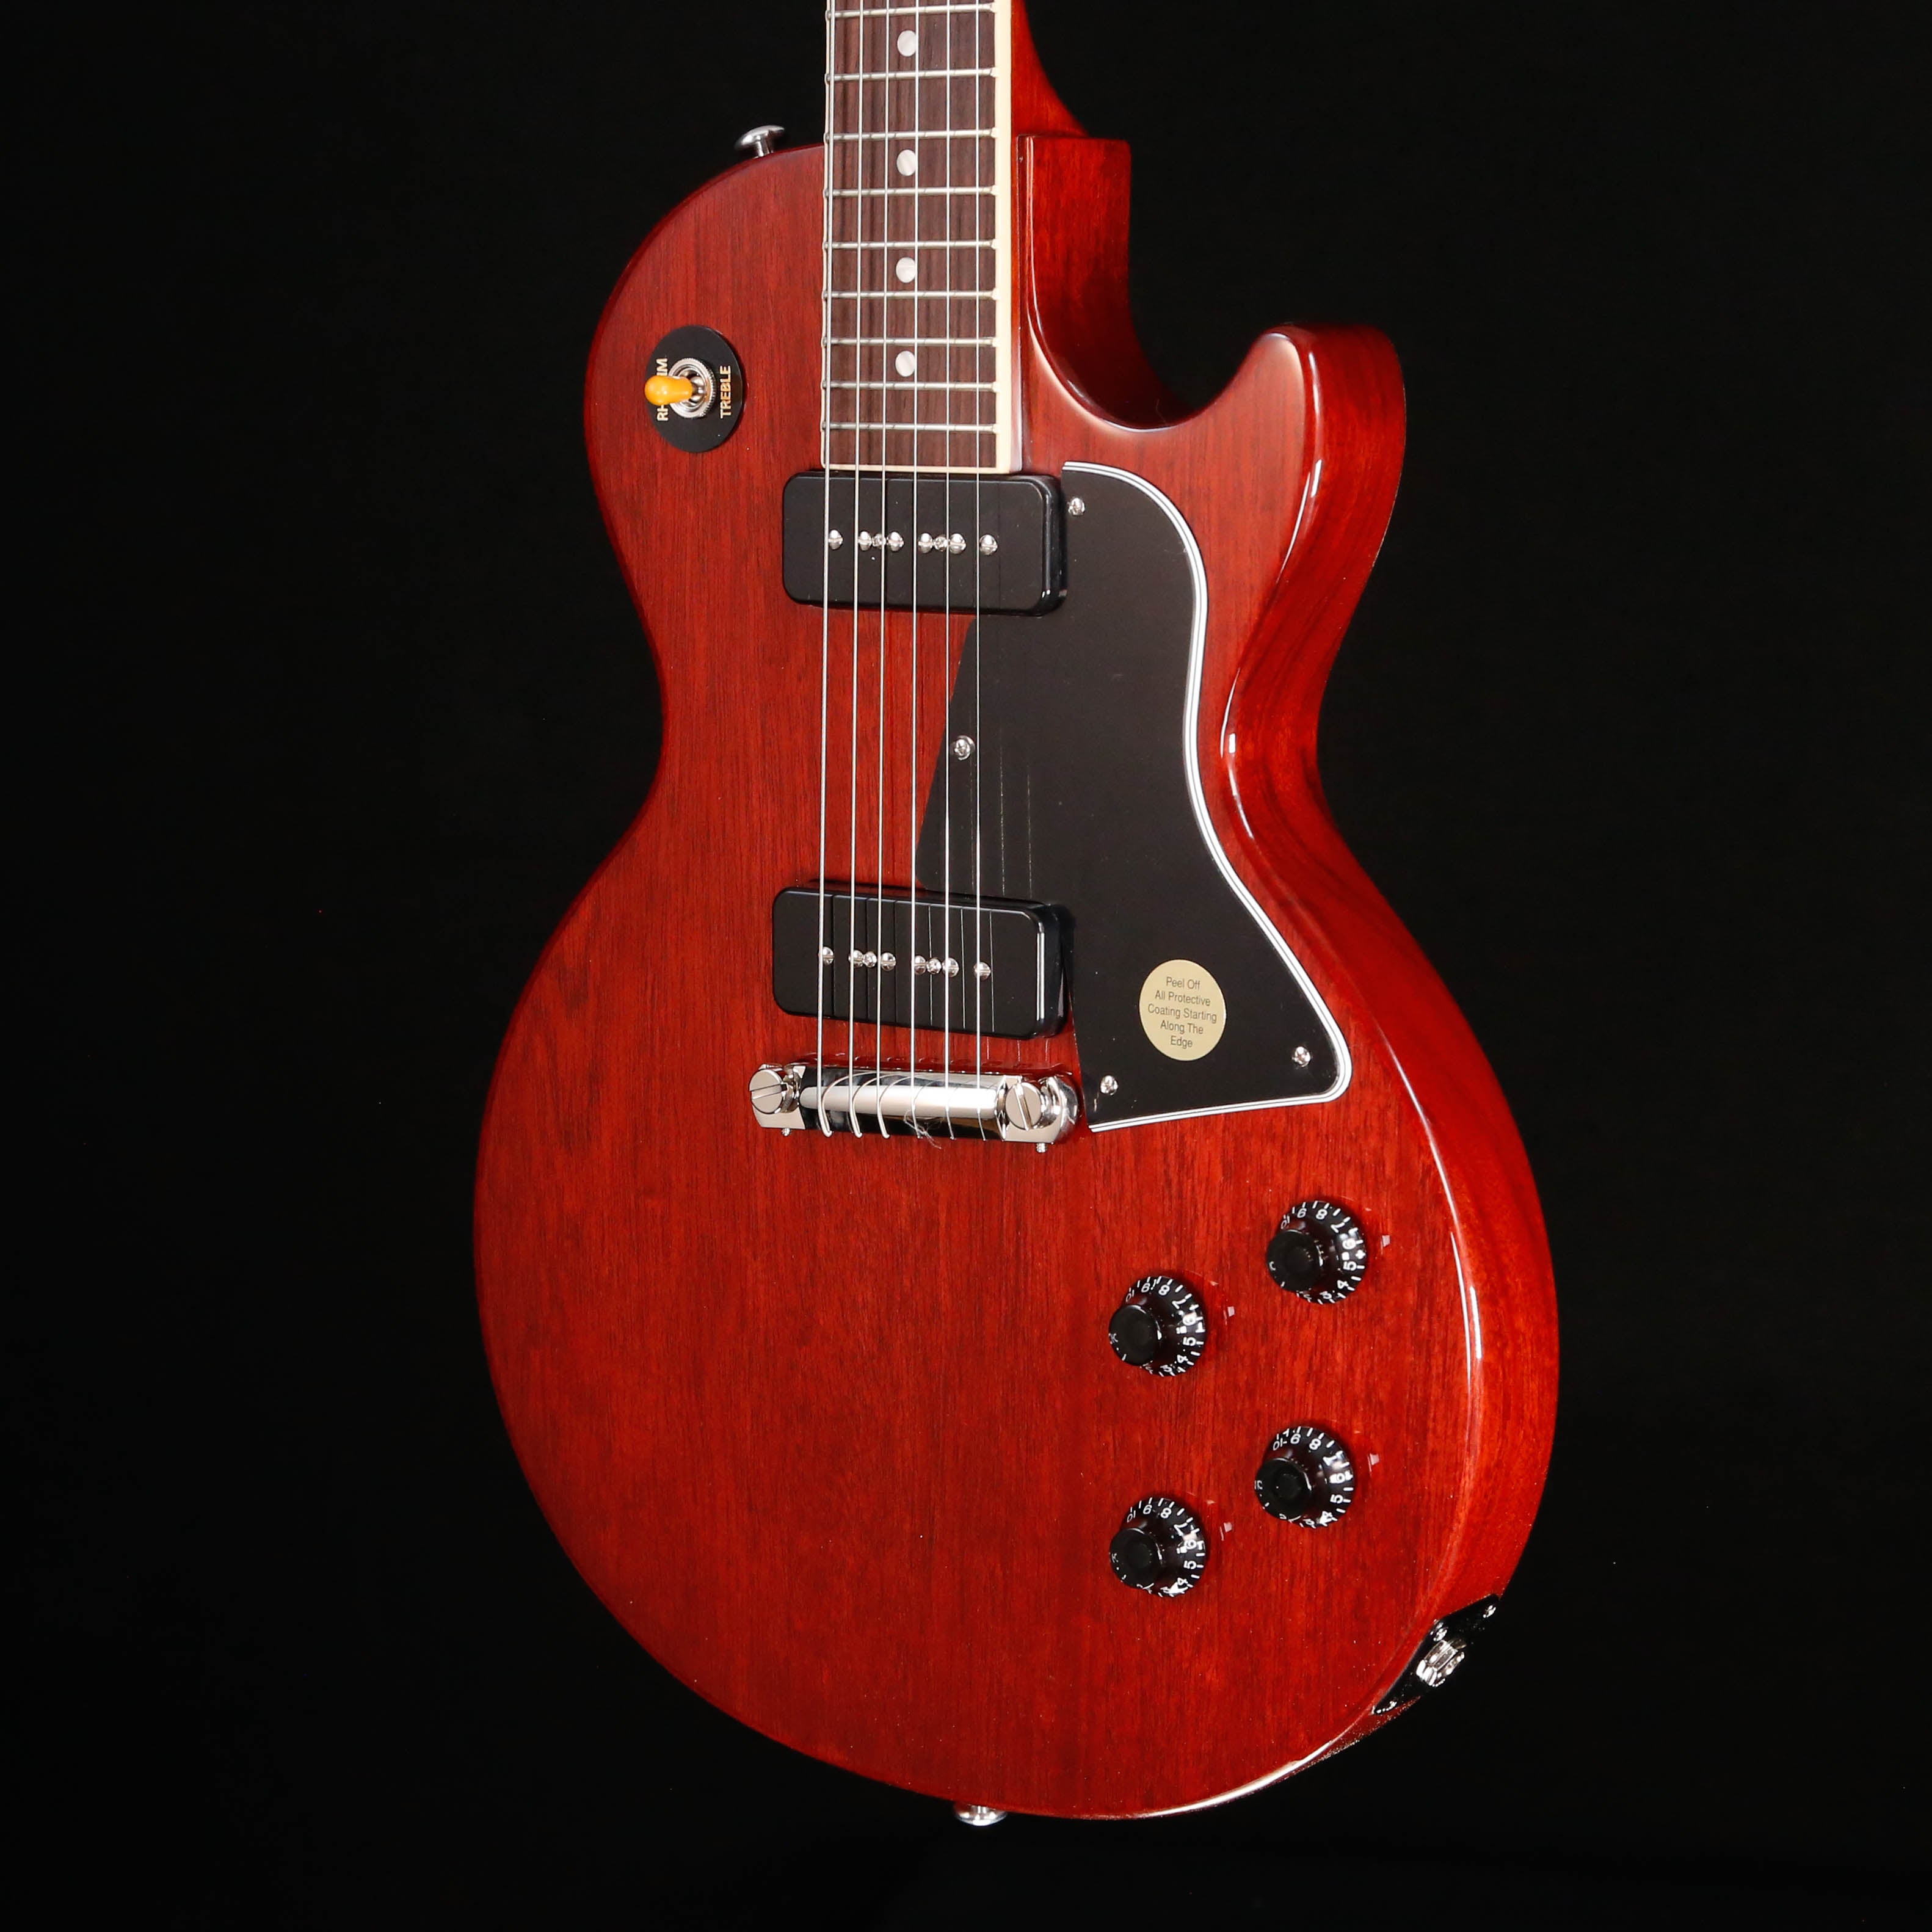 Gibson Les Paul Special, Vintage Cherry